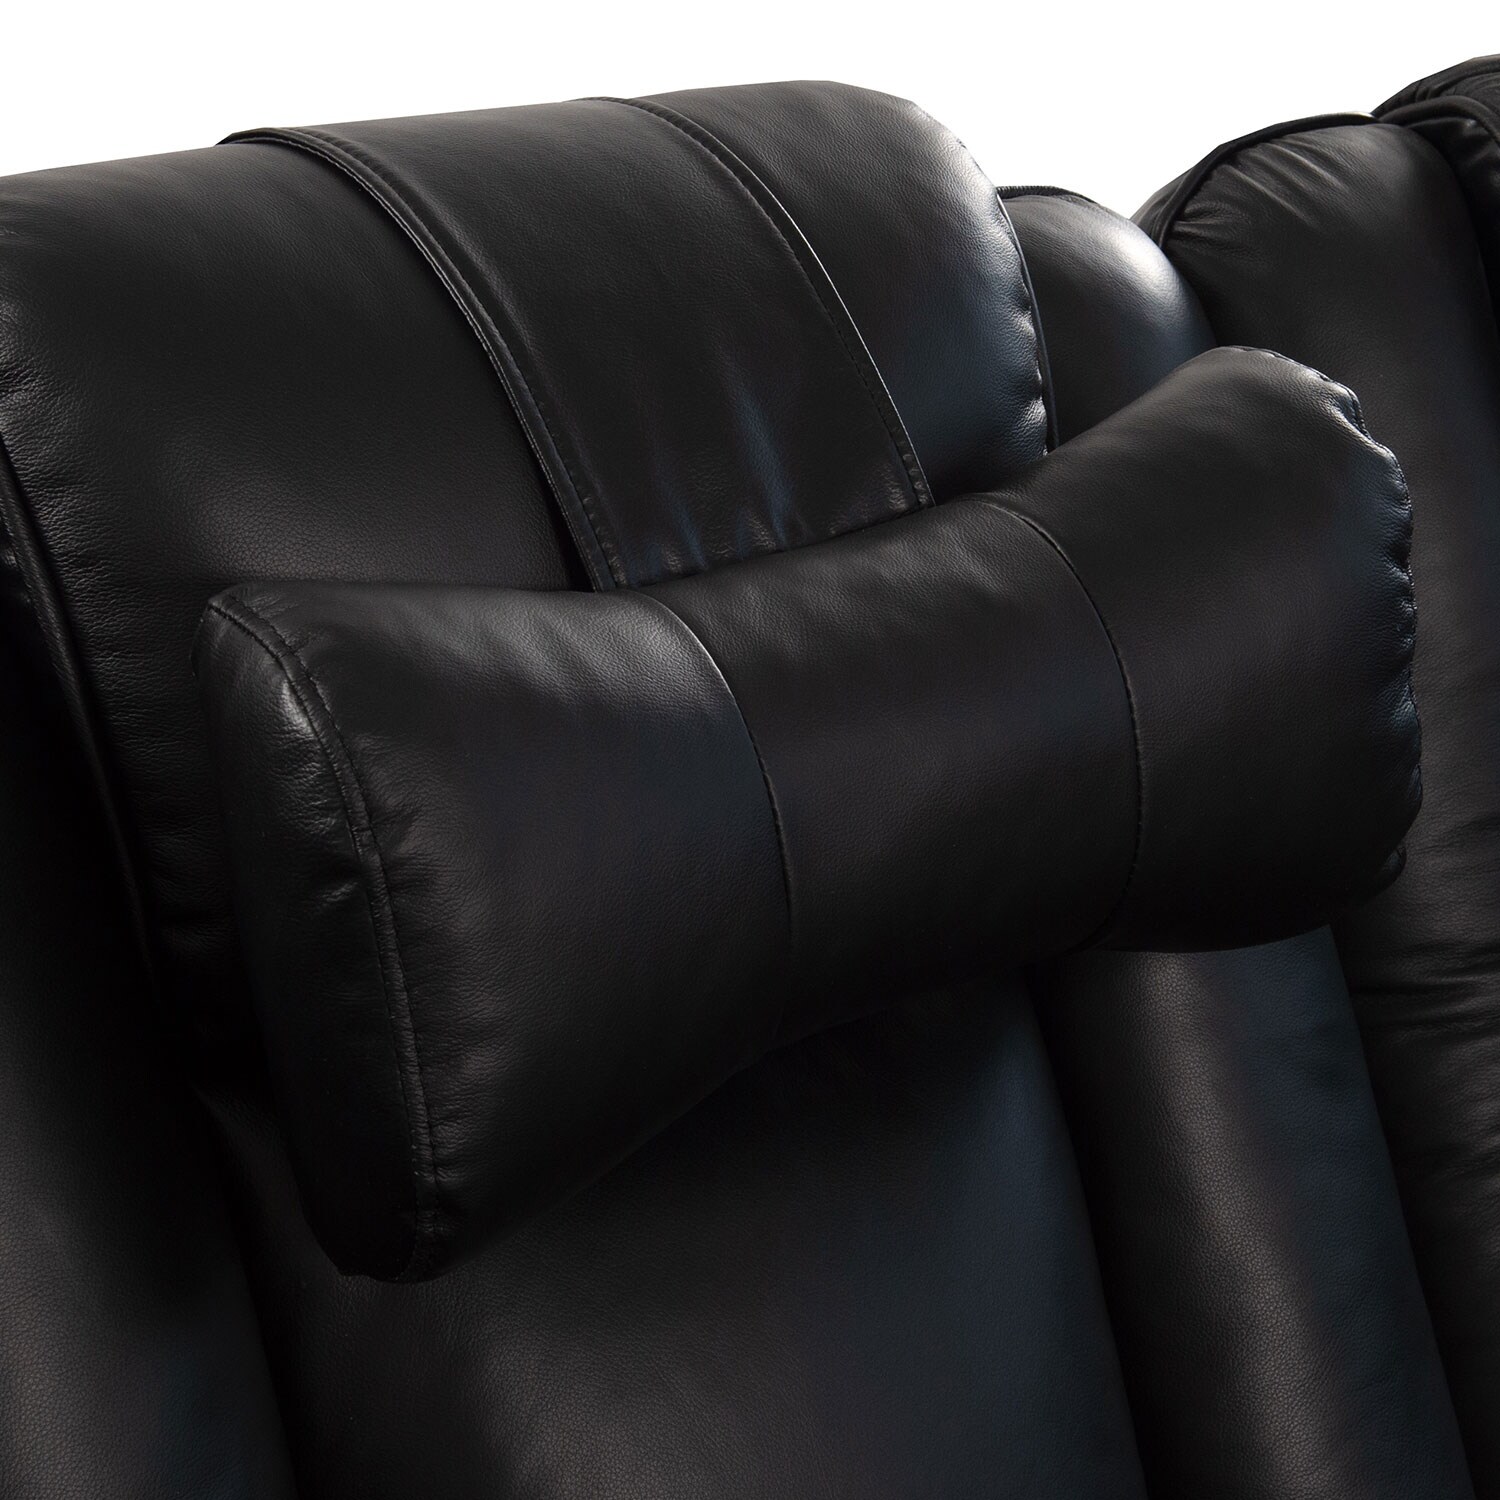 https://ak1.ostkcdn.com/images/products/is/images/direct/4f656b1325e5279c5d3eb75b2d8f01ed79c6c452/Octane-Seating-Contoured-Recliner-Pillow---Black-Bonded-Leather.jpg